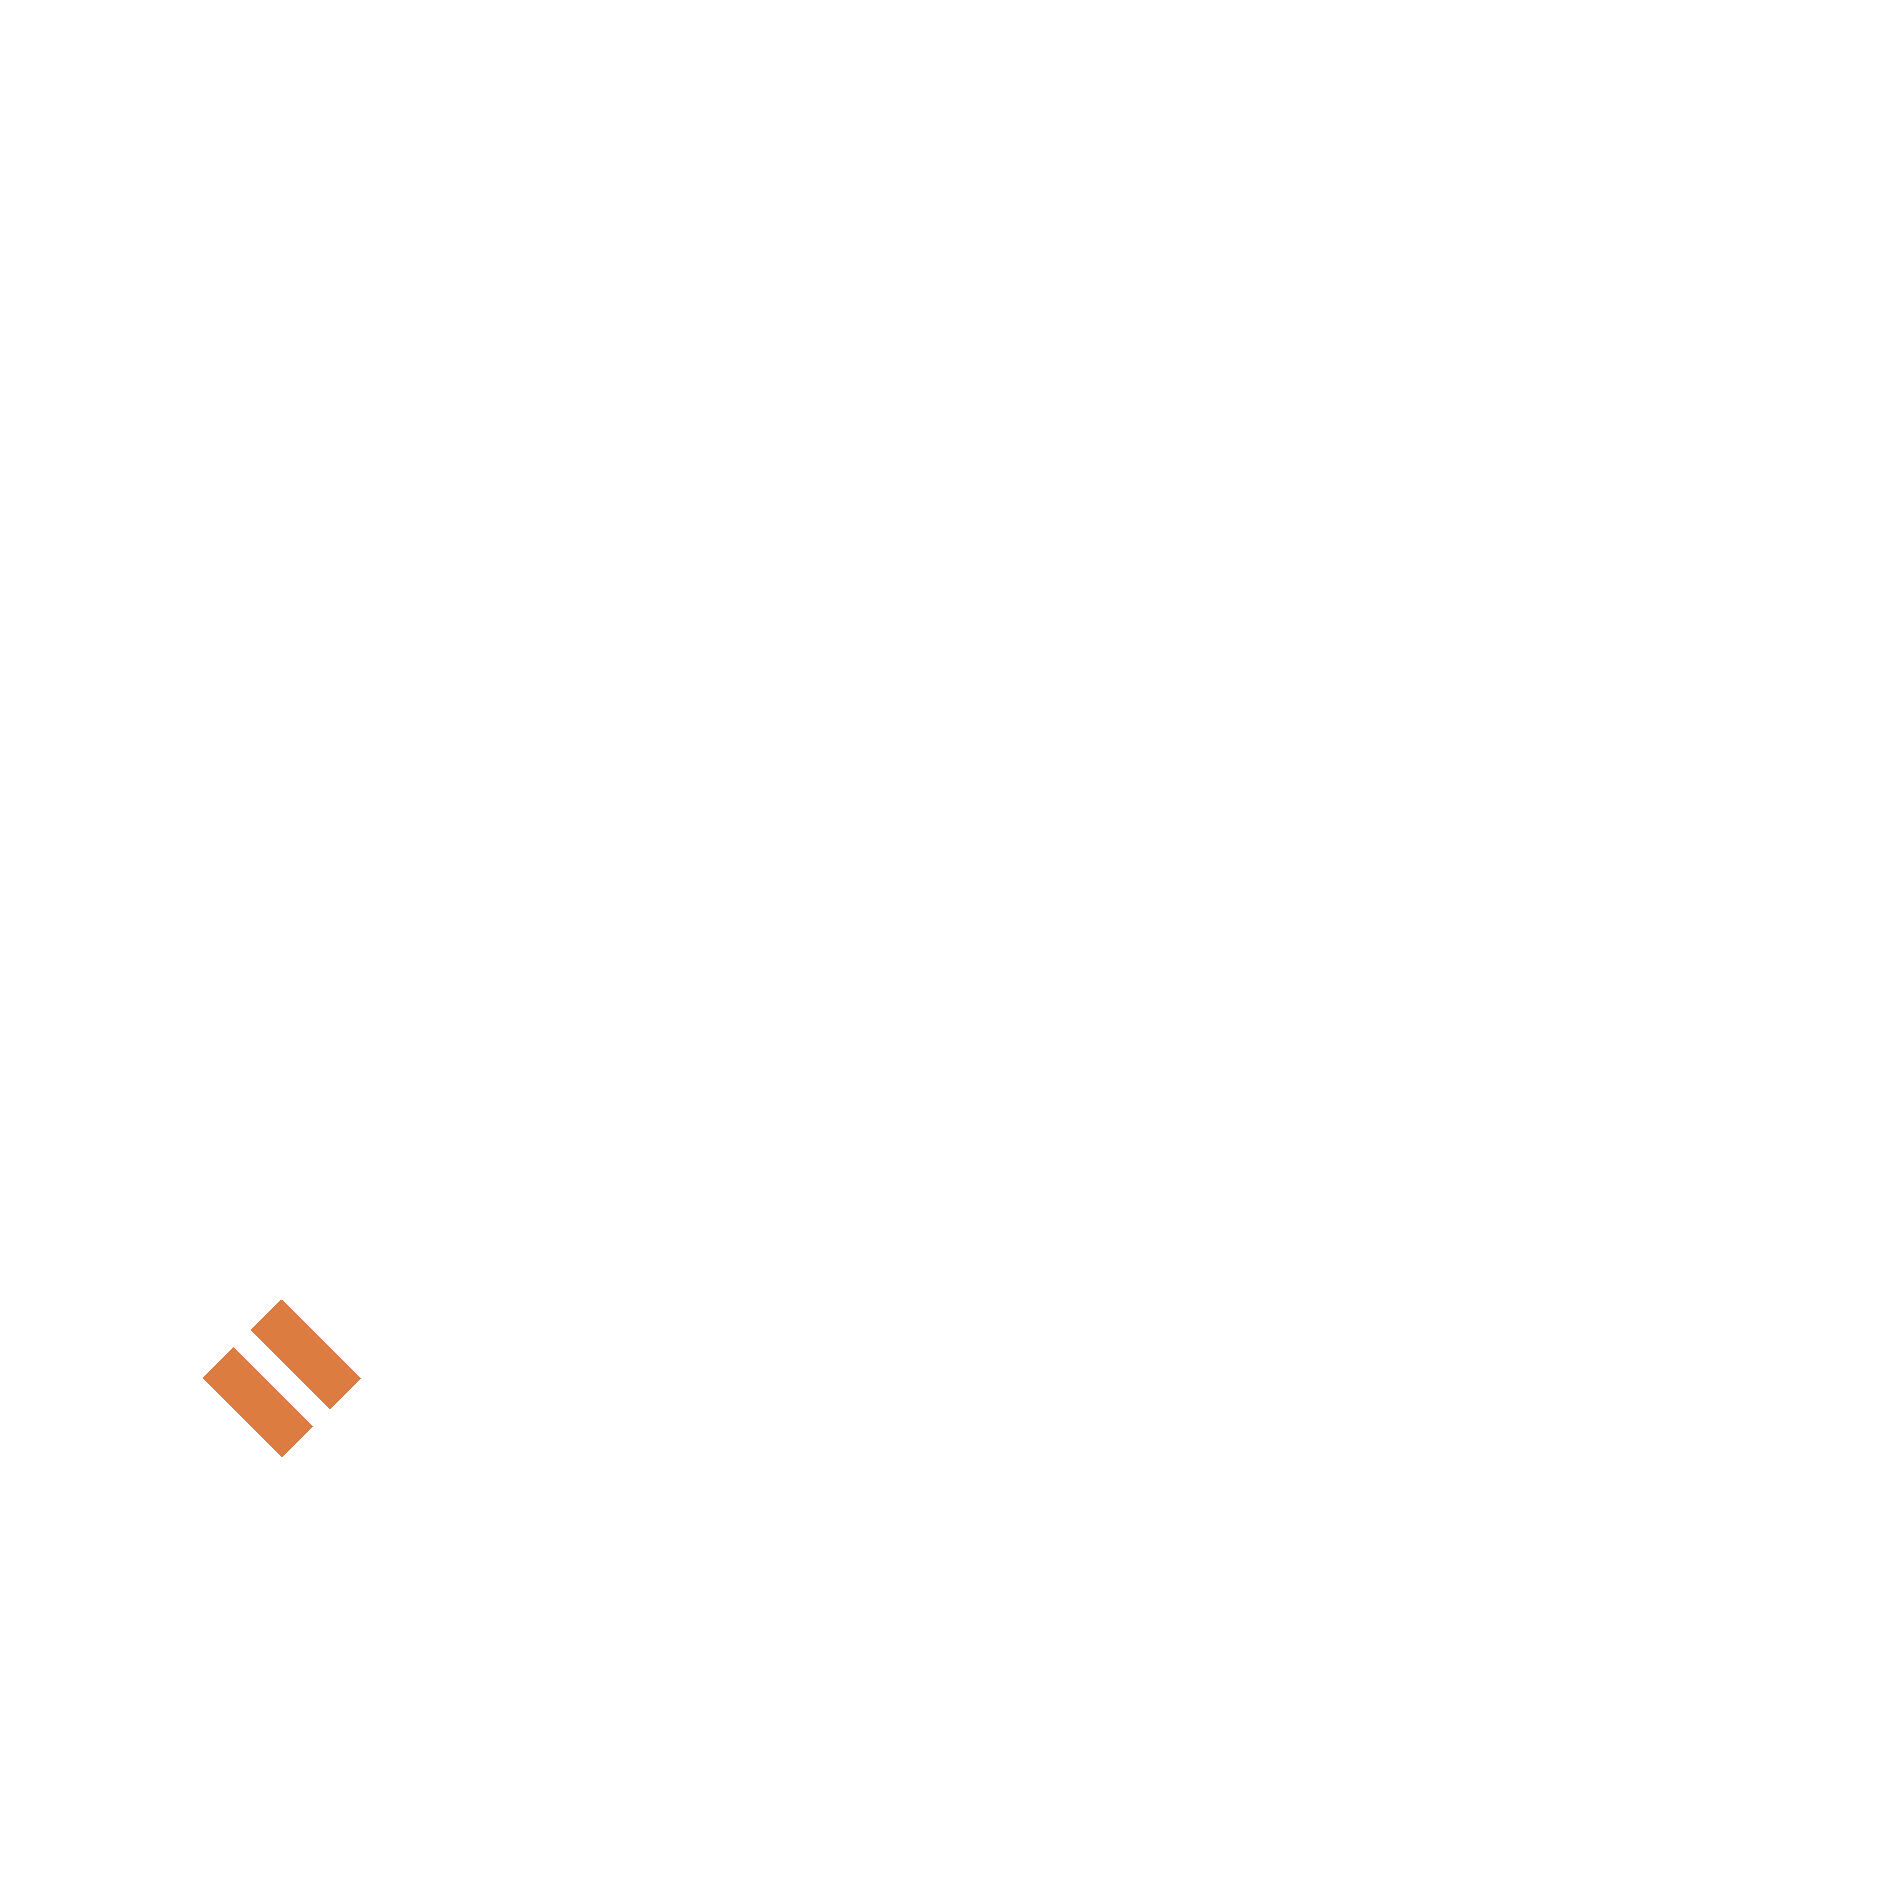 AVconnected